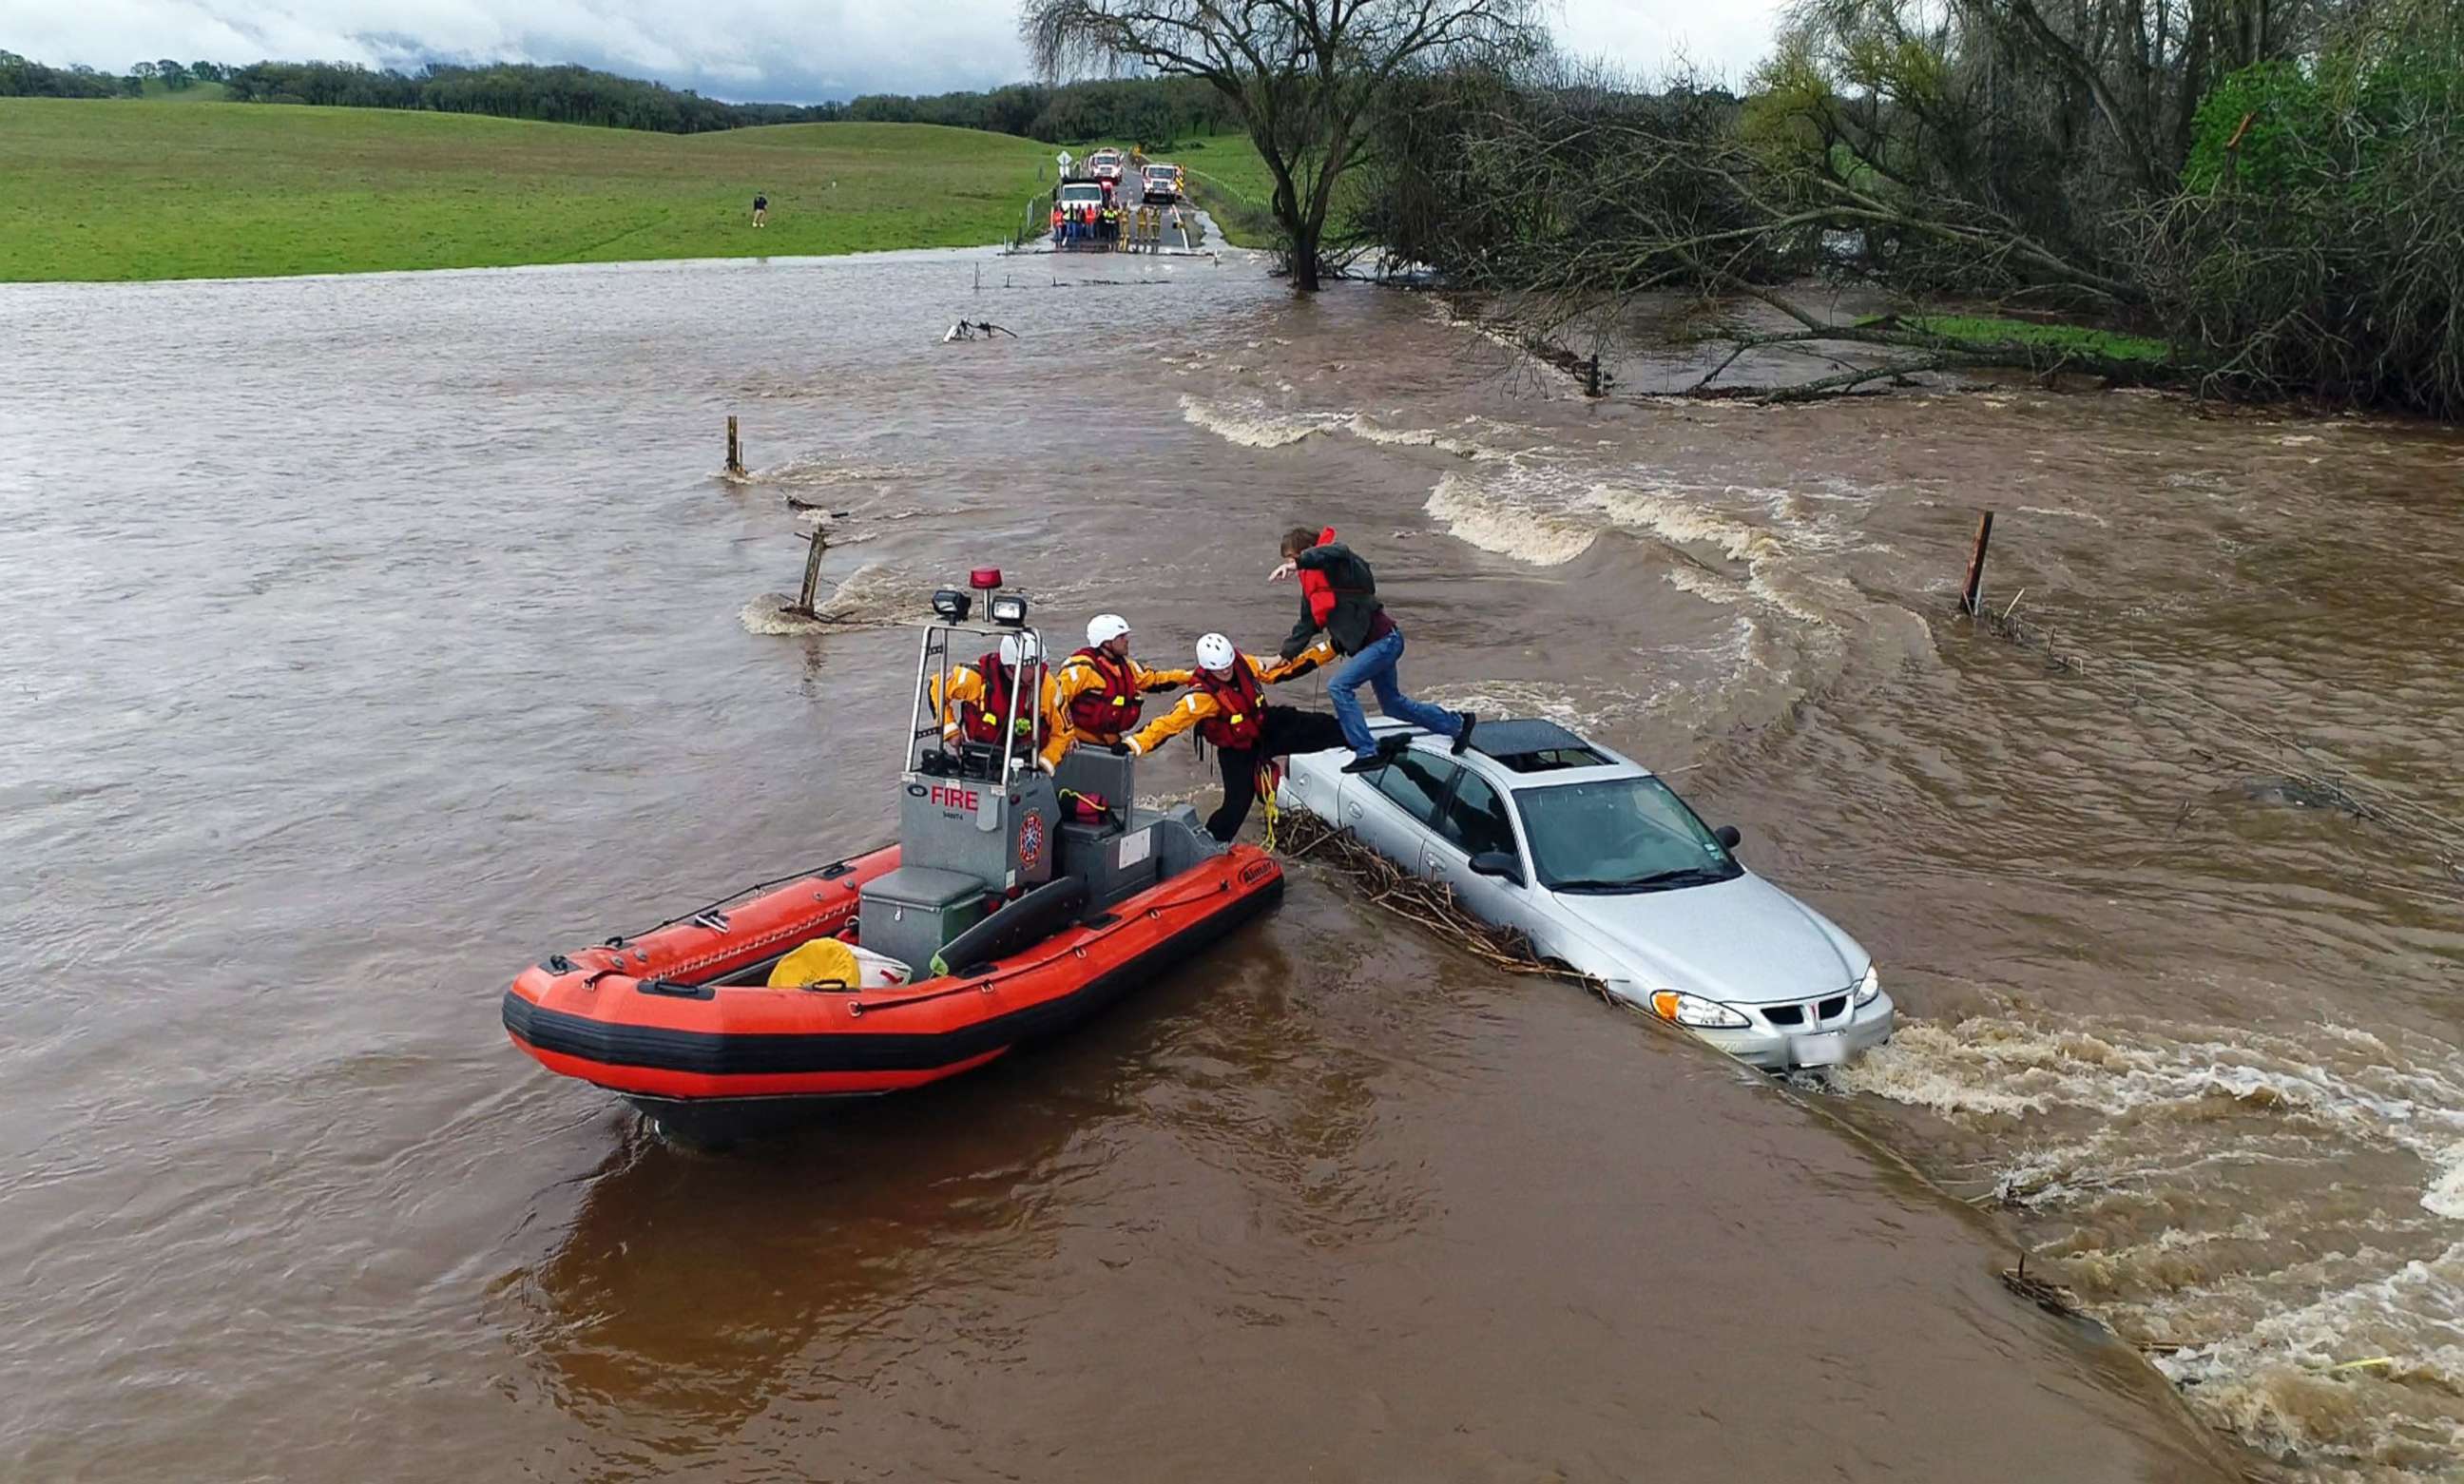 PHOTO: Firefighters from the Folsom, Calif., Fire Department rescued a motorist whose car became stuck as a flash flood washed over a road, March 22, 2018.